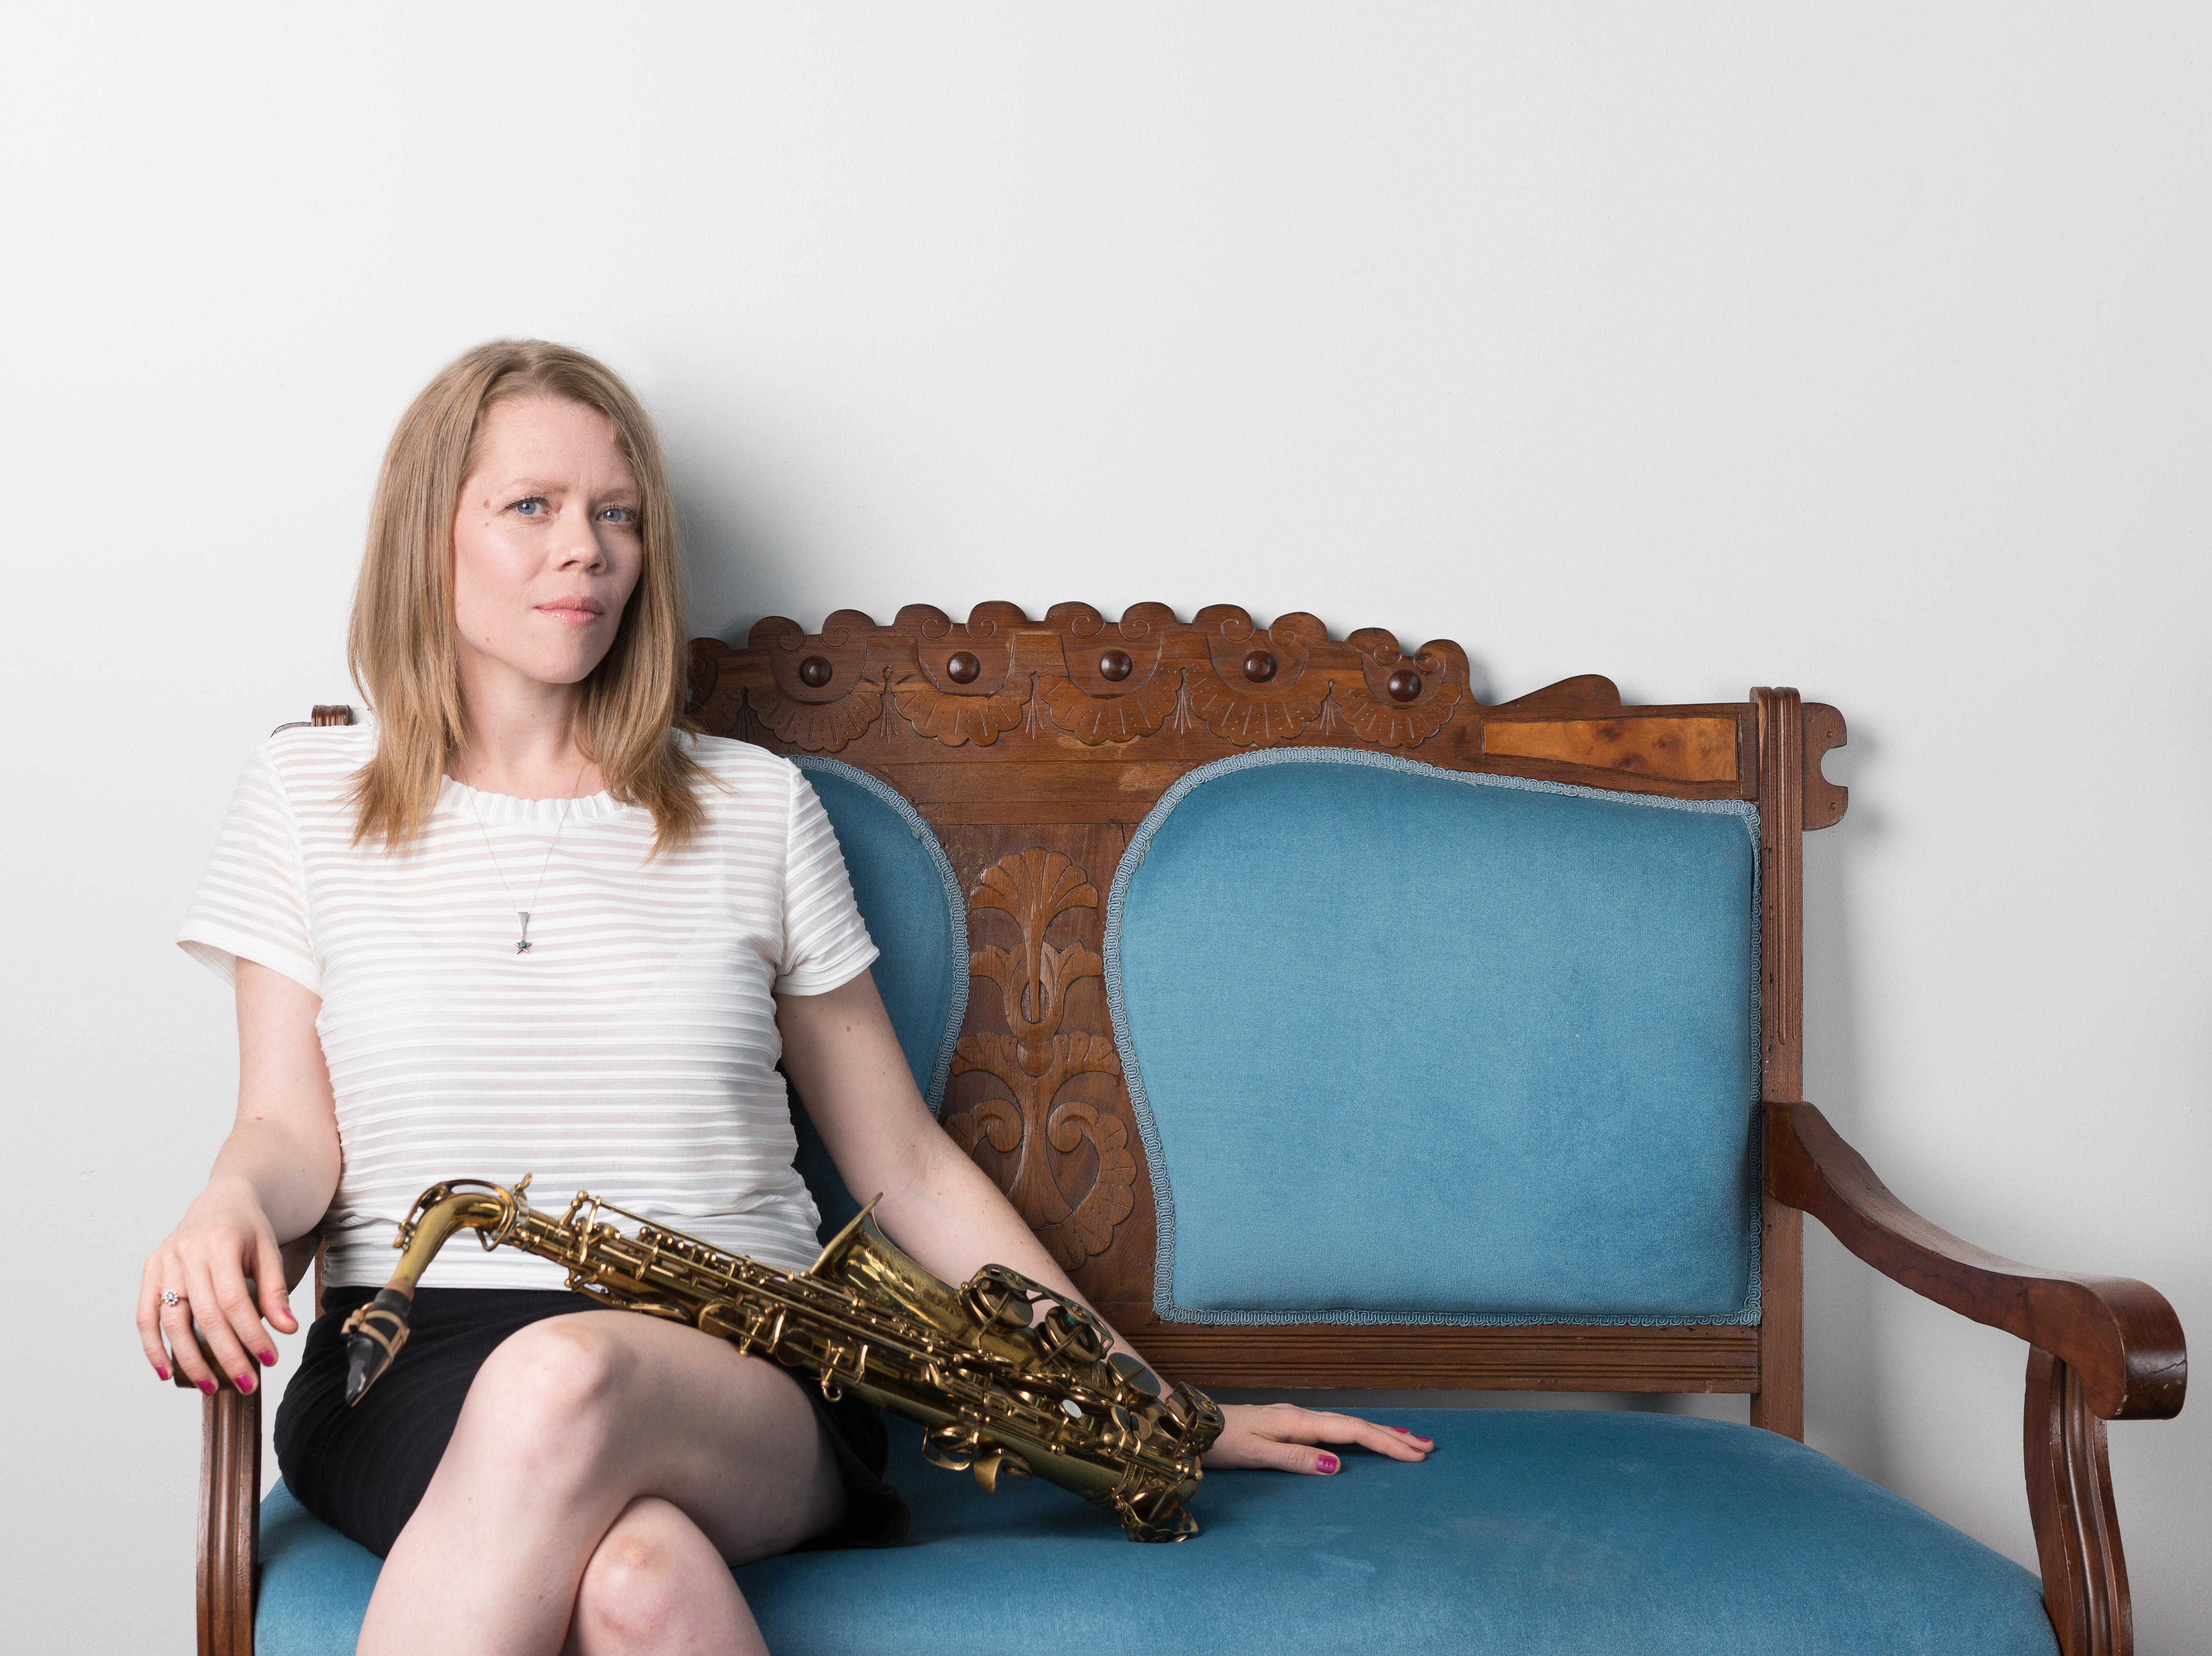 A pale-skinned person with medium-length blond hair sits on a wooden love seat with blue cushions. A saxophone rests on the person's lap.